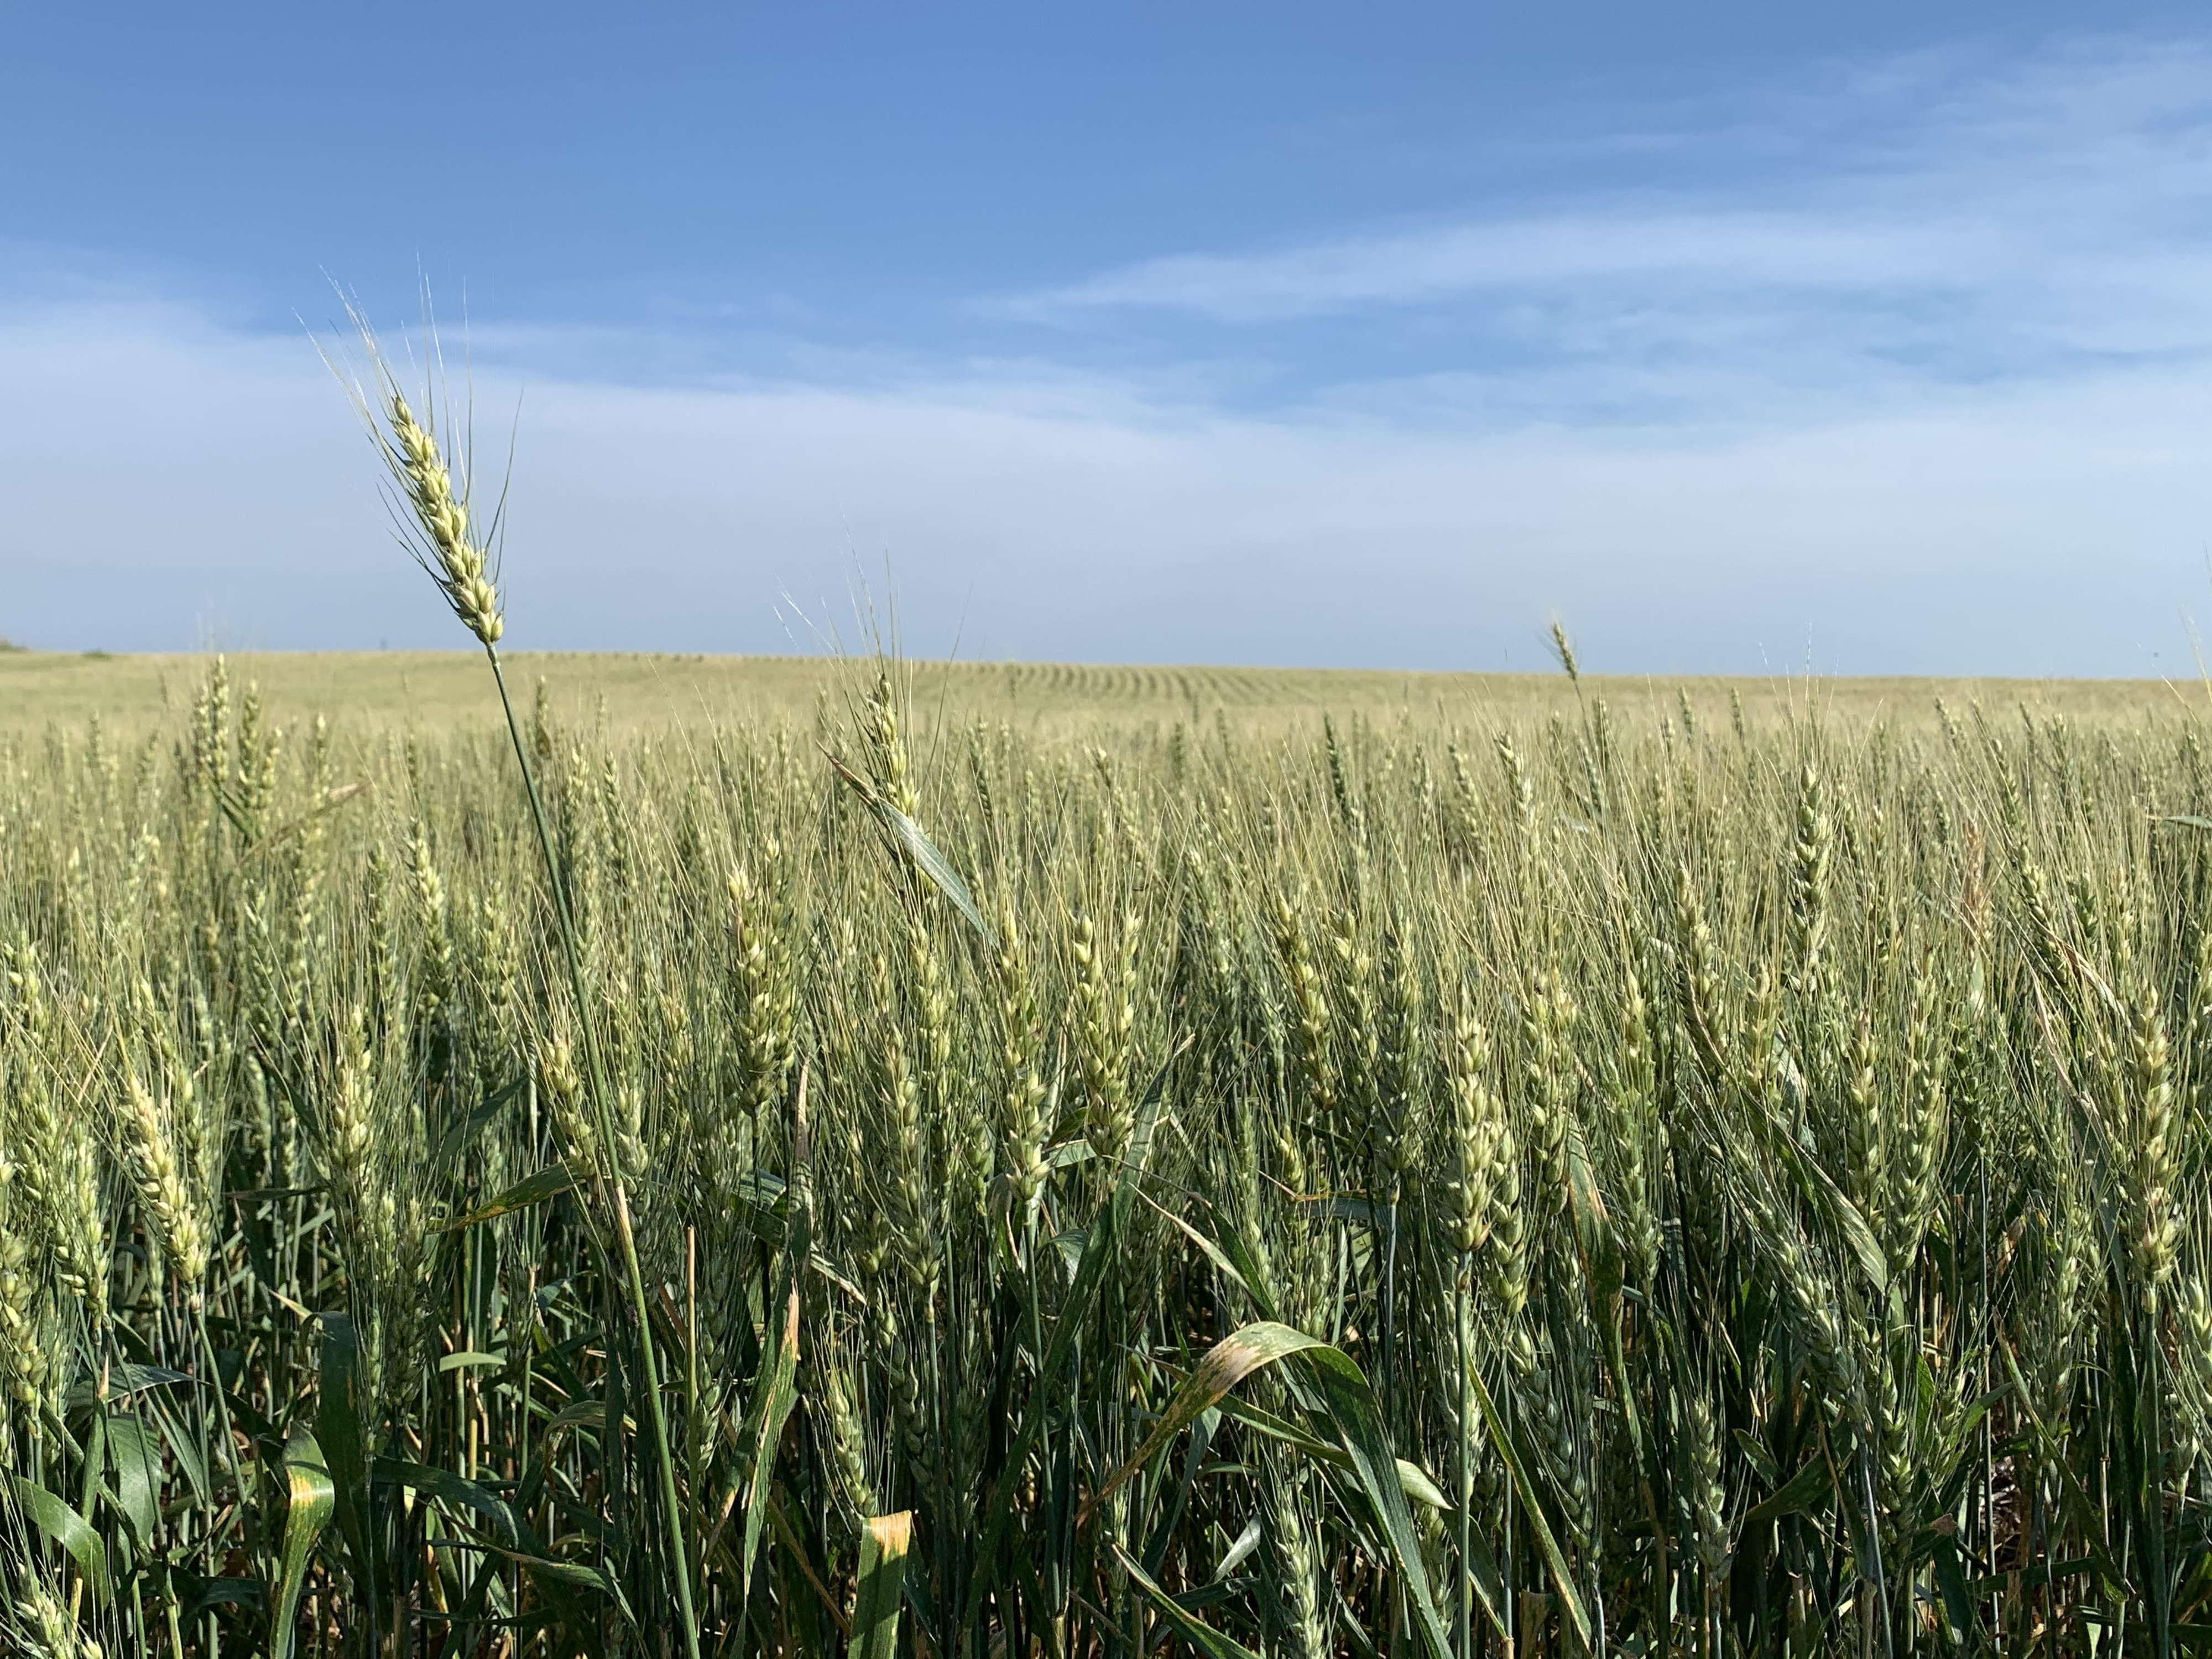 Afternoon Ag News, March 7, 2022: Russia's invasion into Ukraine has some wheat buyers considering other sources